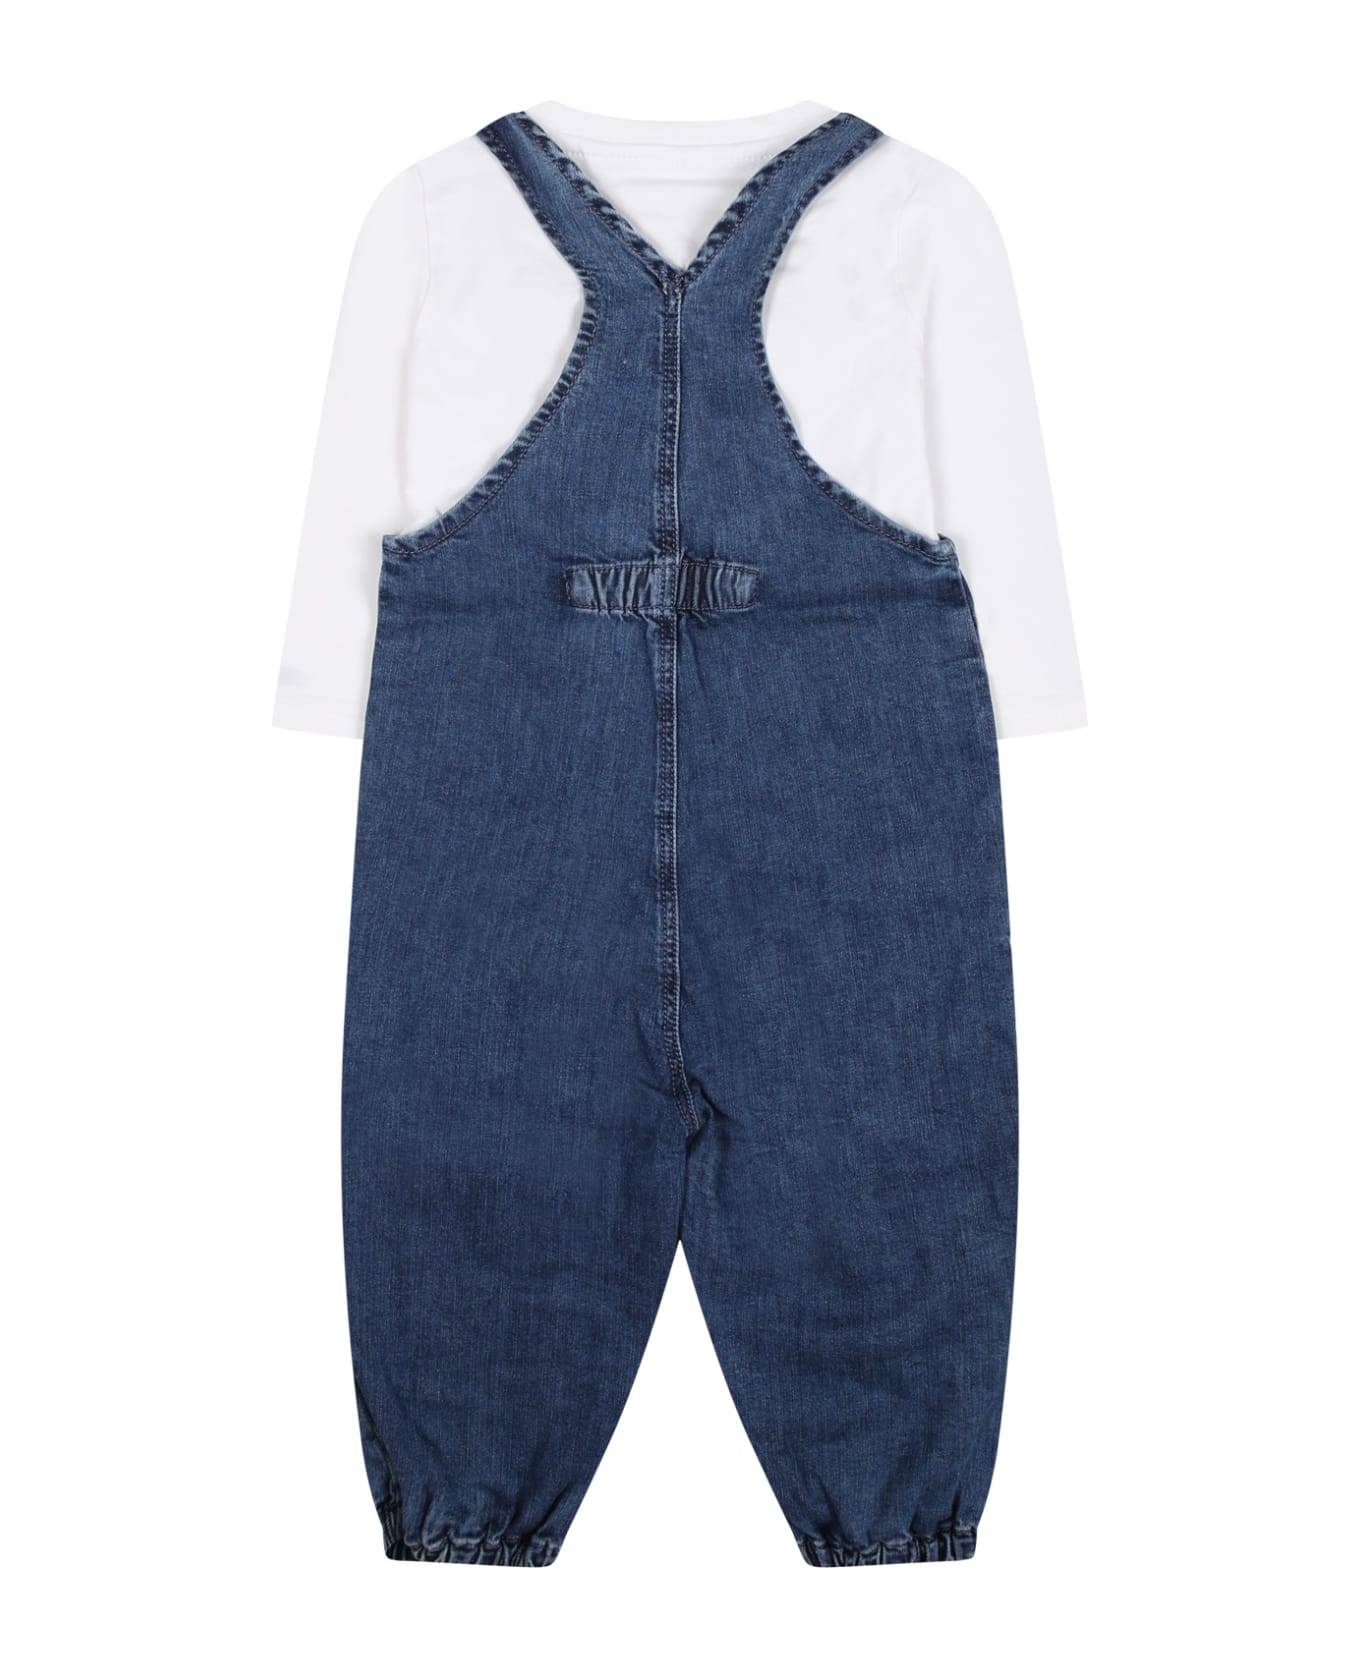 Tommy Hilfiger Denim Dungarees For Baby Boy With Iconic Flag - Denim